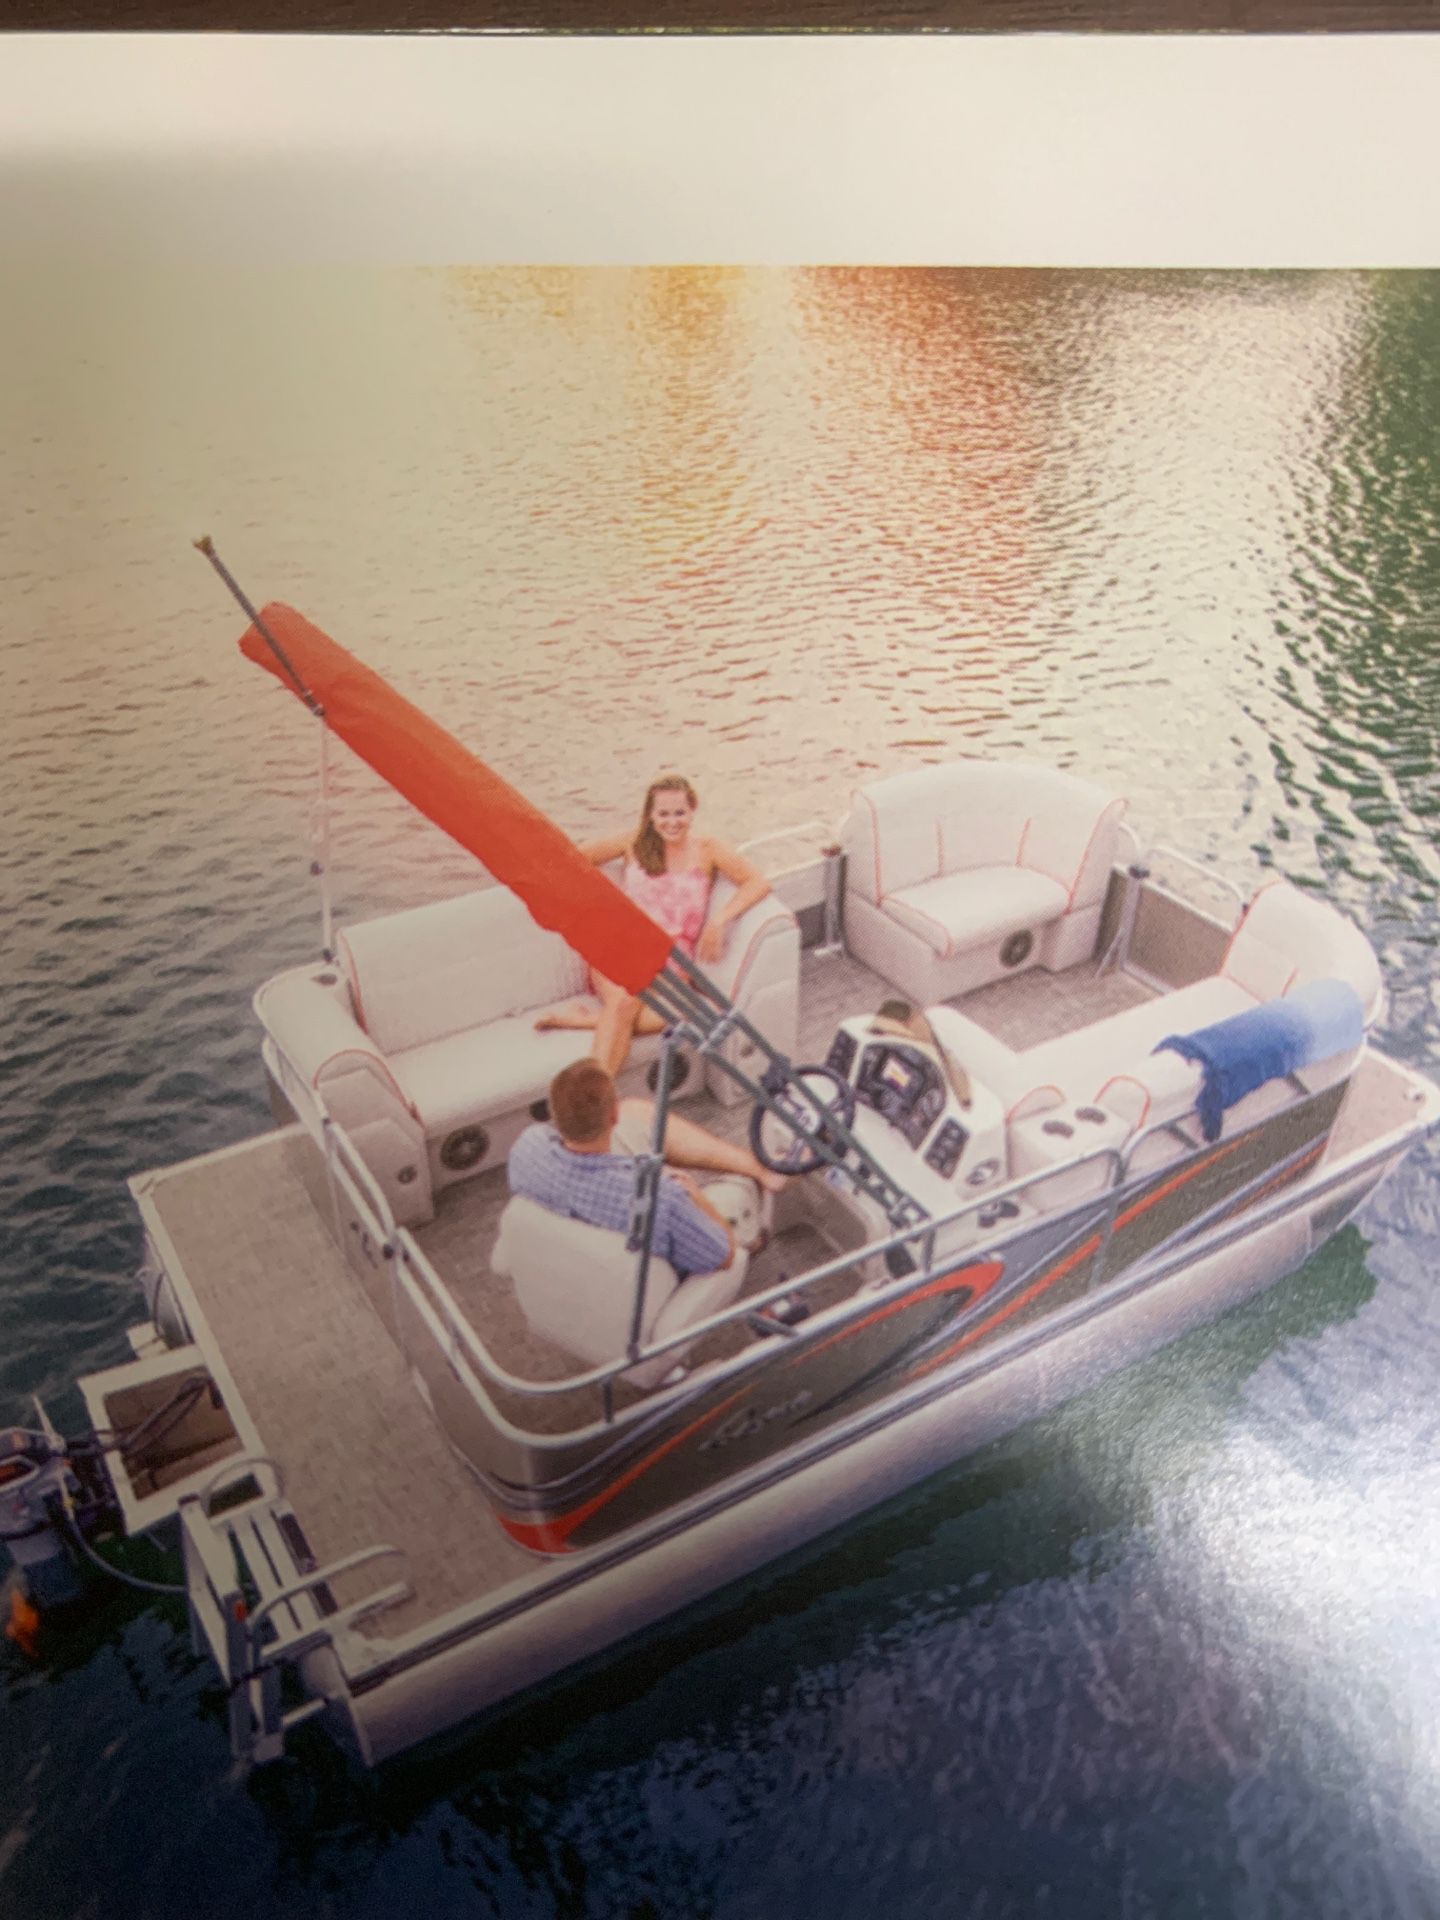 Wanted:13 to 16 foot electric driven pontoon boat ready to hit the lake!!